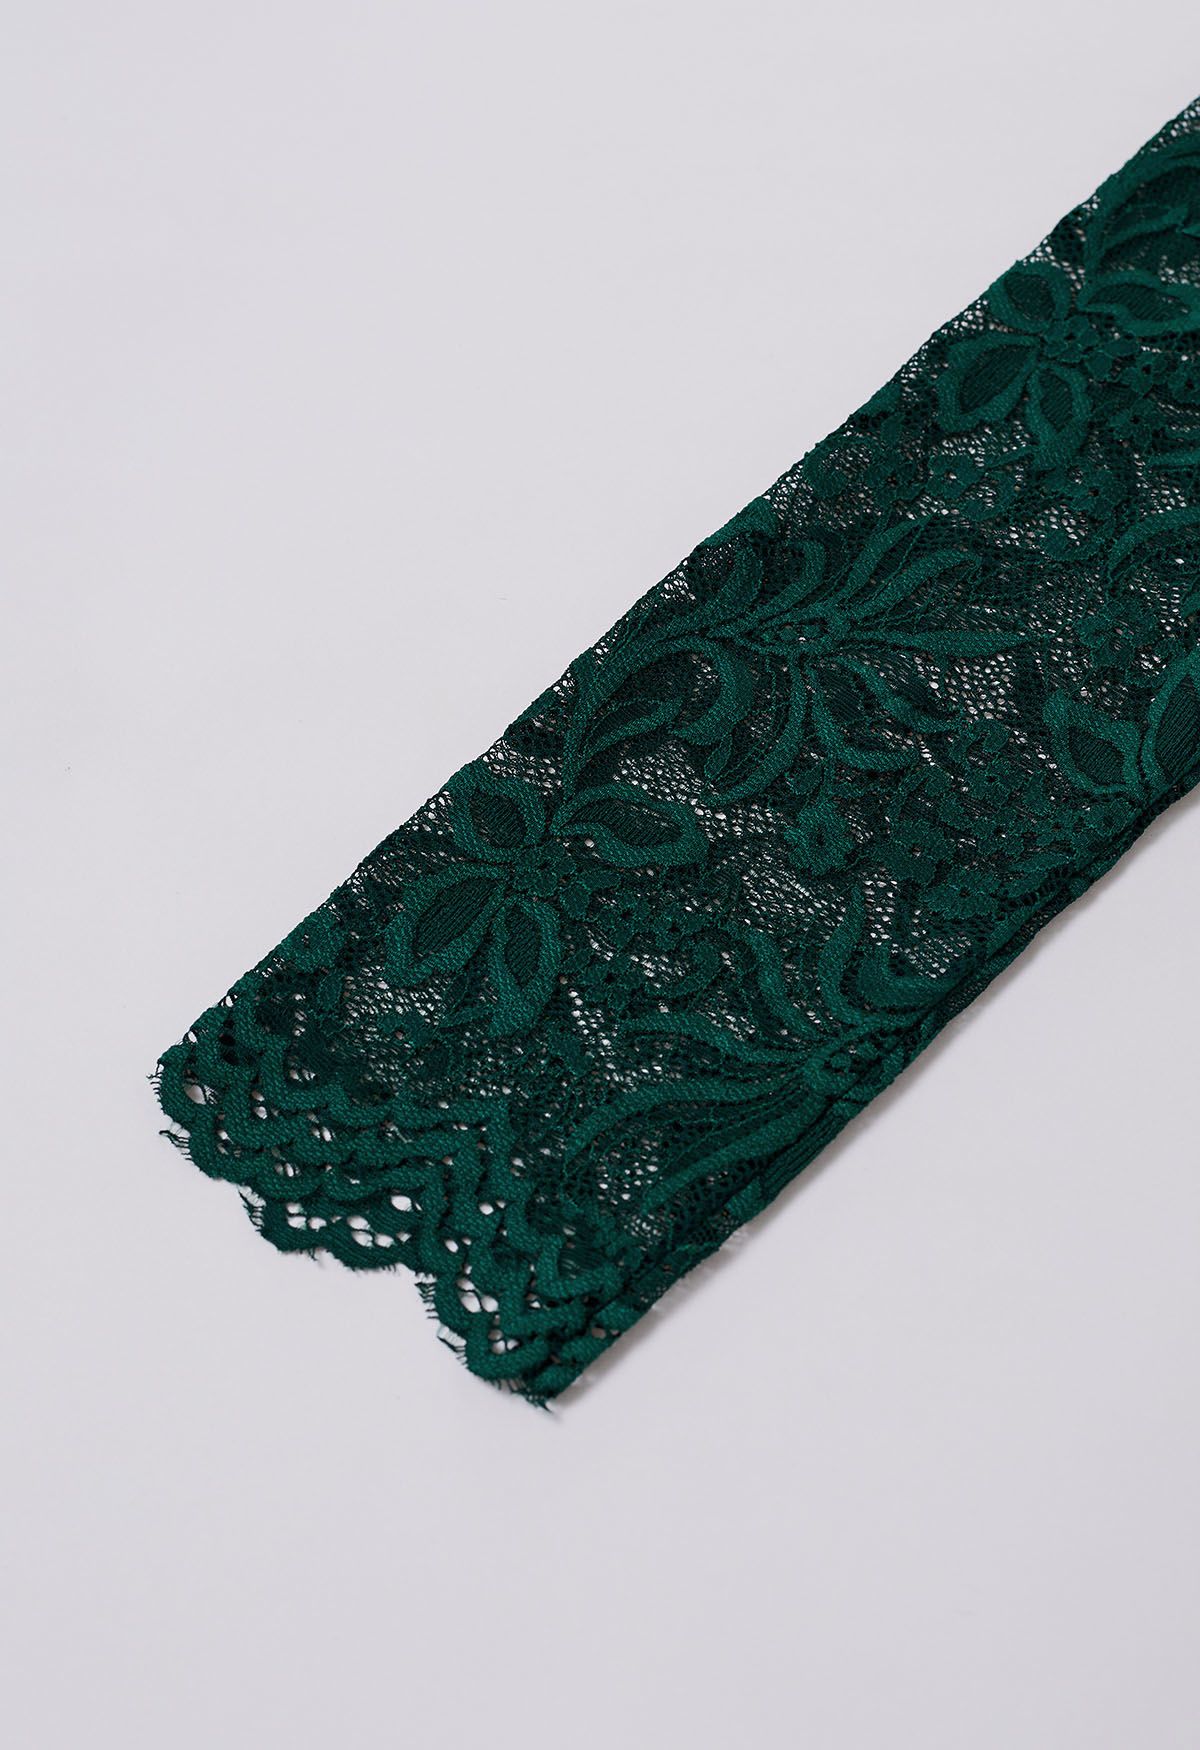 Ethereal Floral Lace Spliced Knit Top in Dark Green